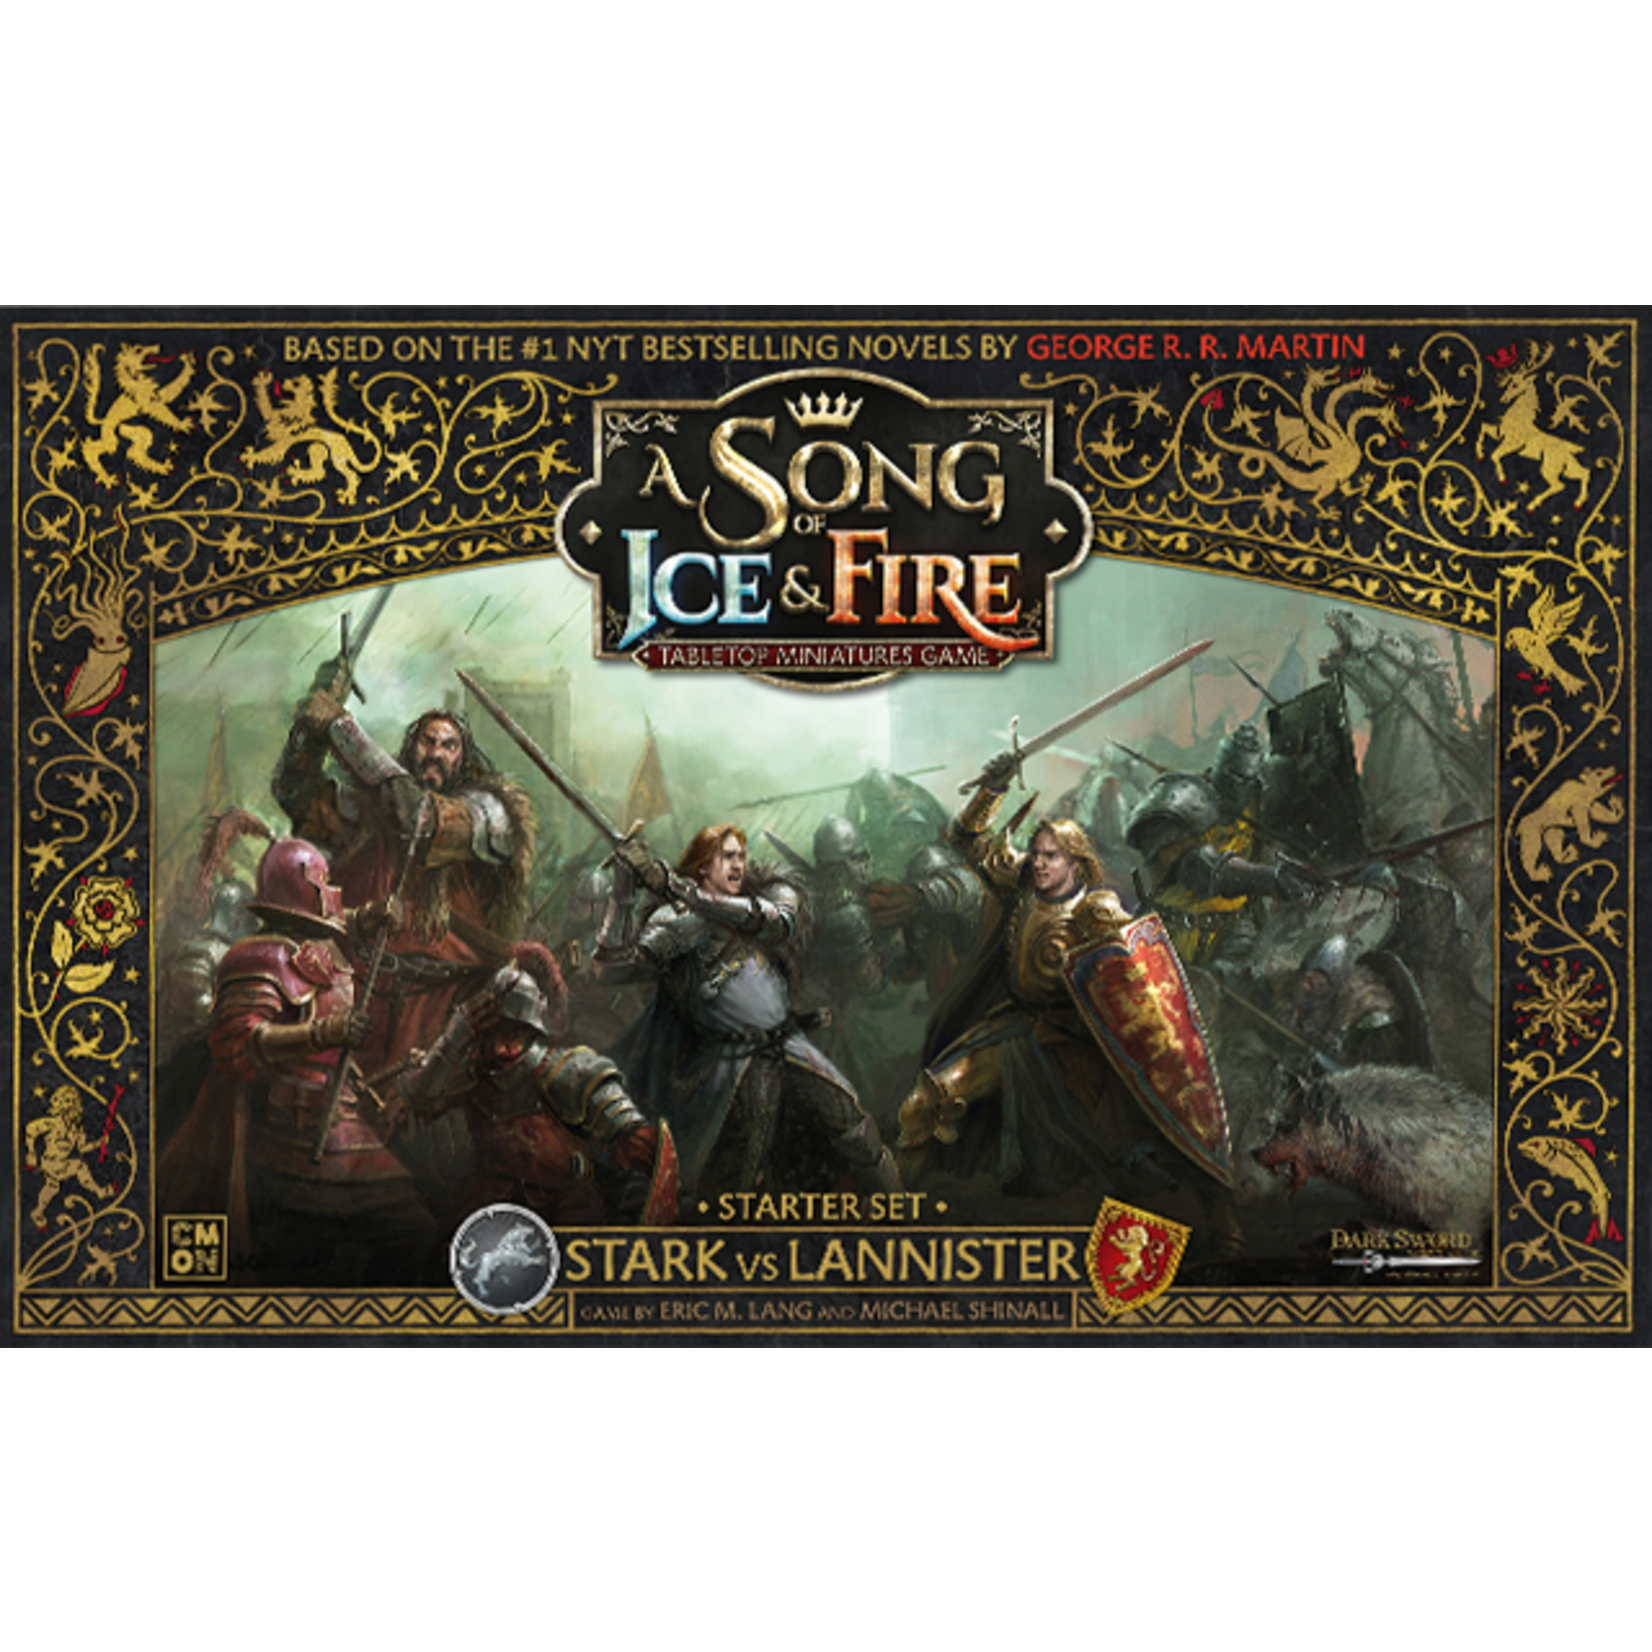 A Song of Ice & Fire: Tabletop Miniatures Game: Starter Set - Stark vs Lannister